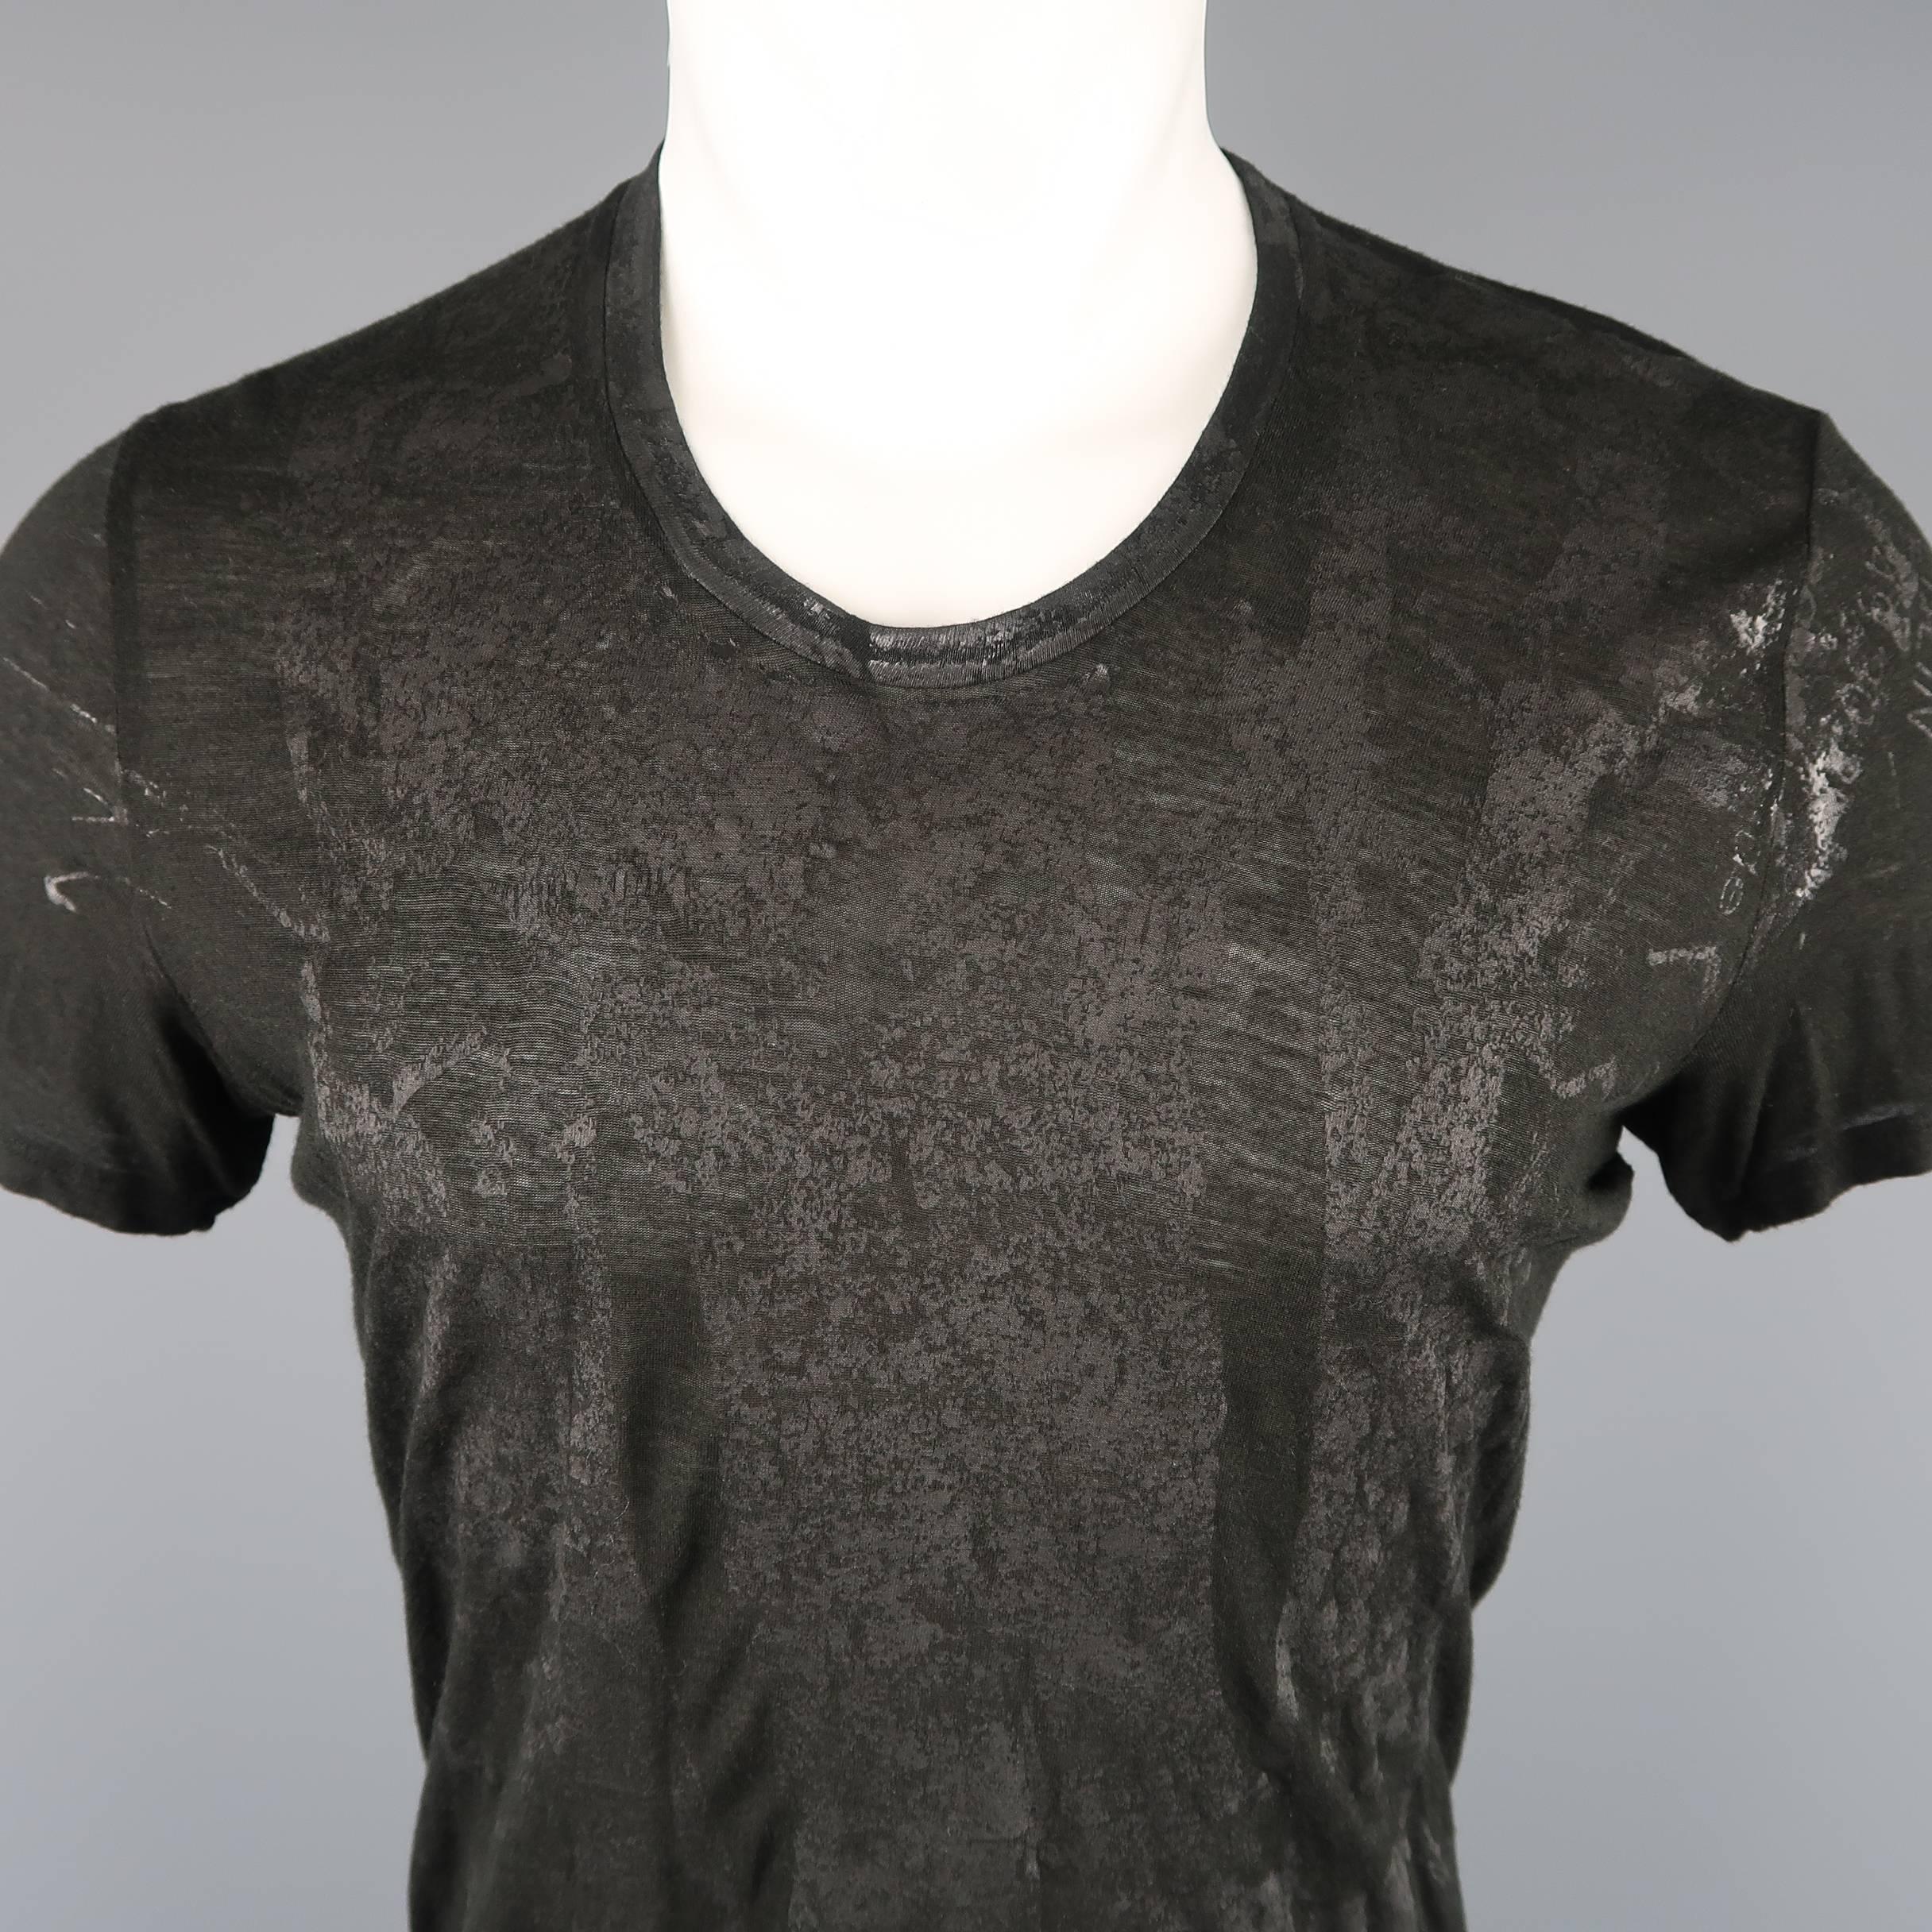 JULIUS_7 asymmetrical T shirt comes in a rayon silk blend burnout jersey with all over distressed graphic print. Made in Japan.
 
Good Pre-Owned Condition.
Marked: JP 2
 
Measurements:
 
Shoulder: 17 in.
Chest: 40 in.
Sleeve: 8 in.
Length: 35